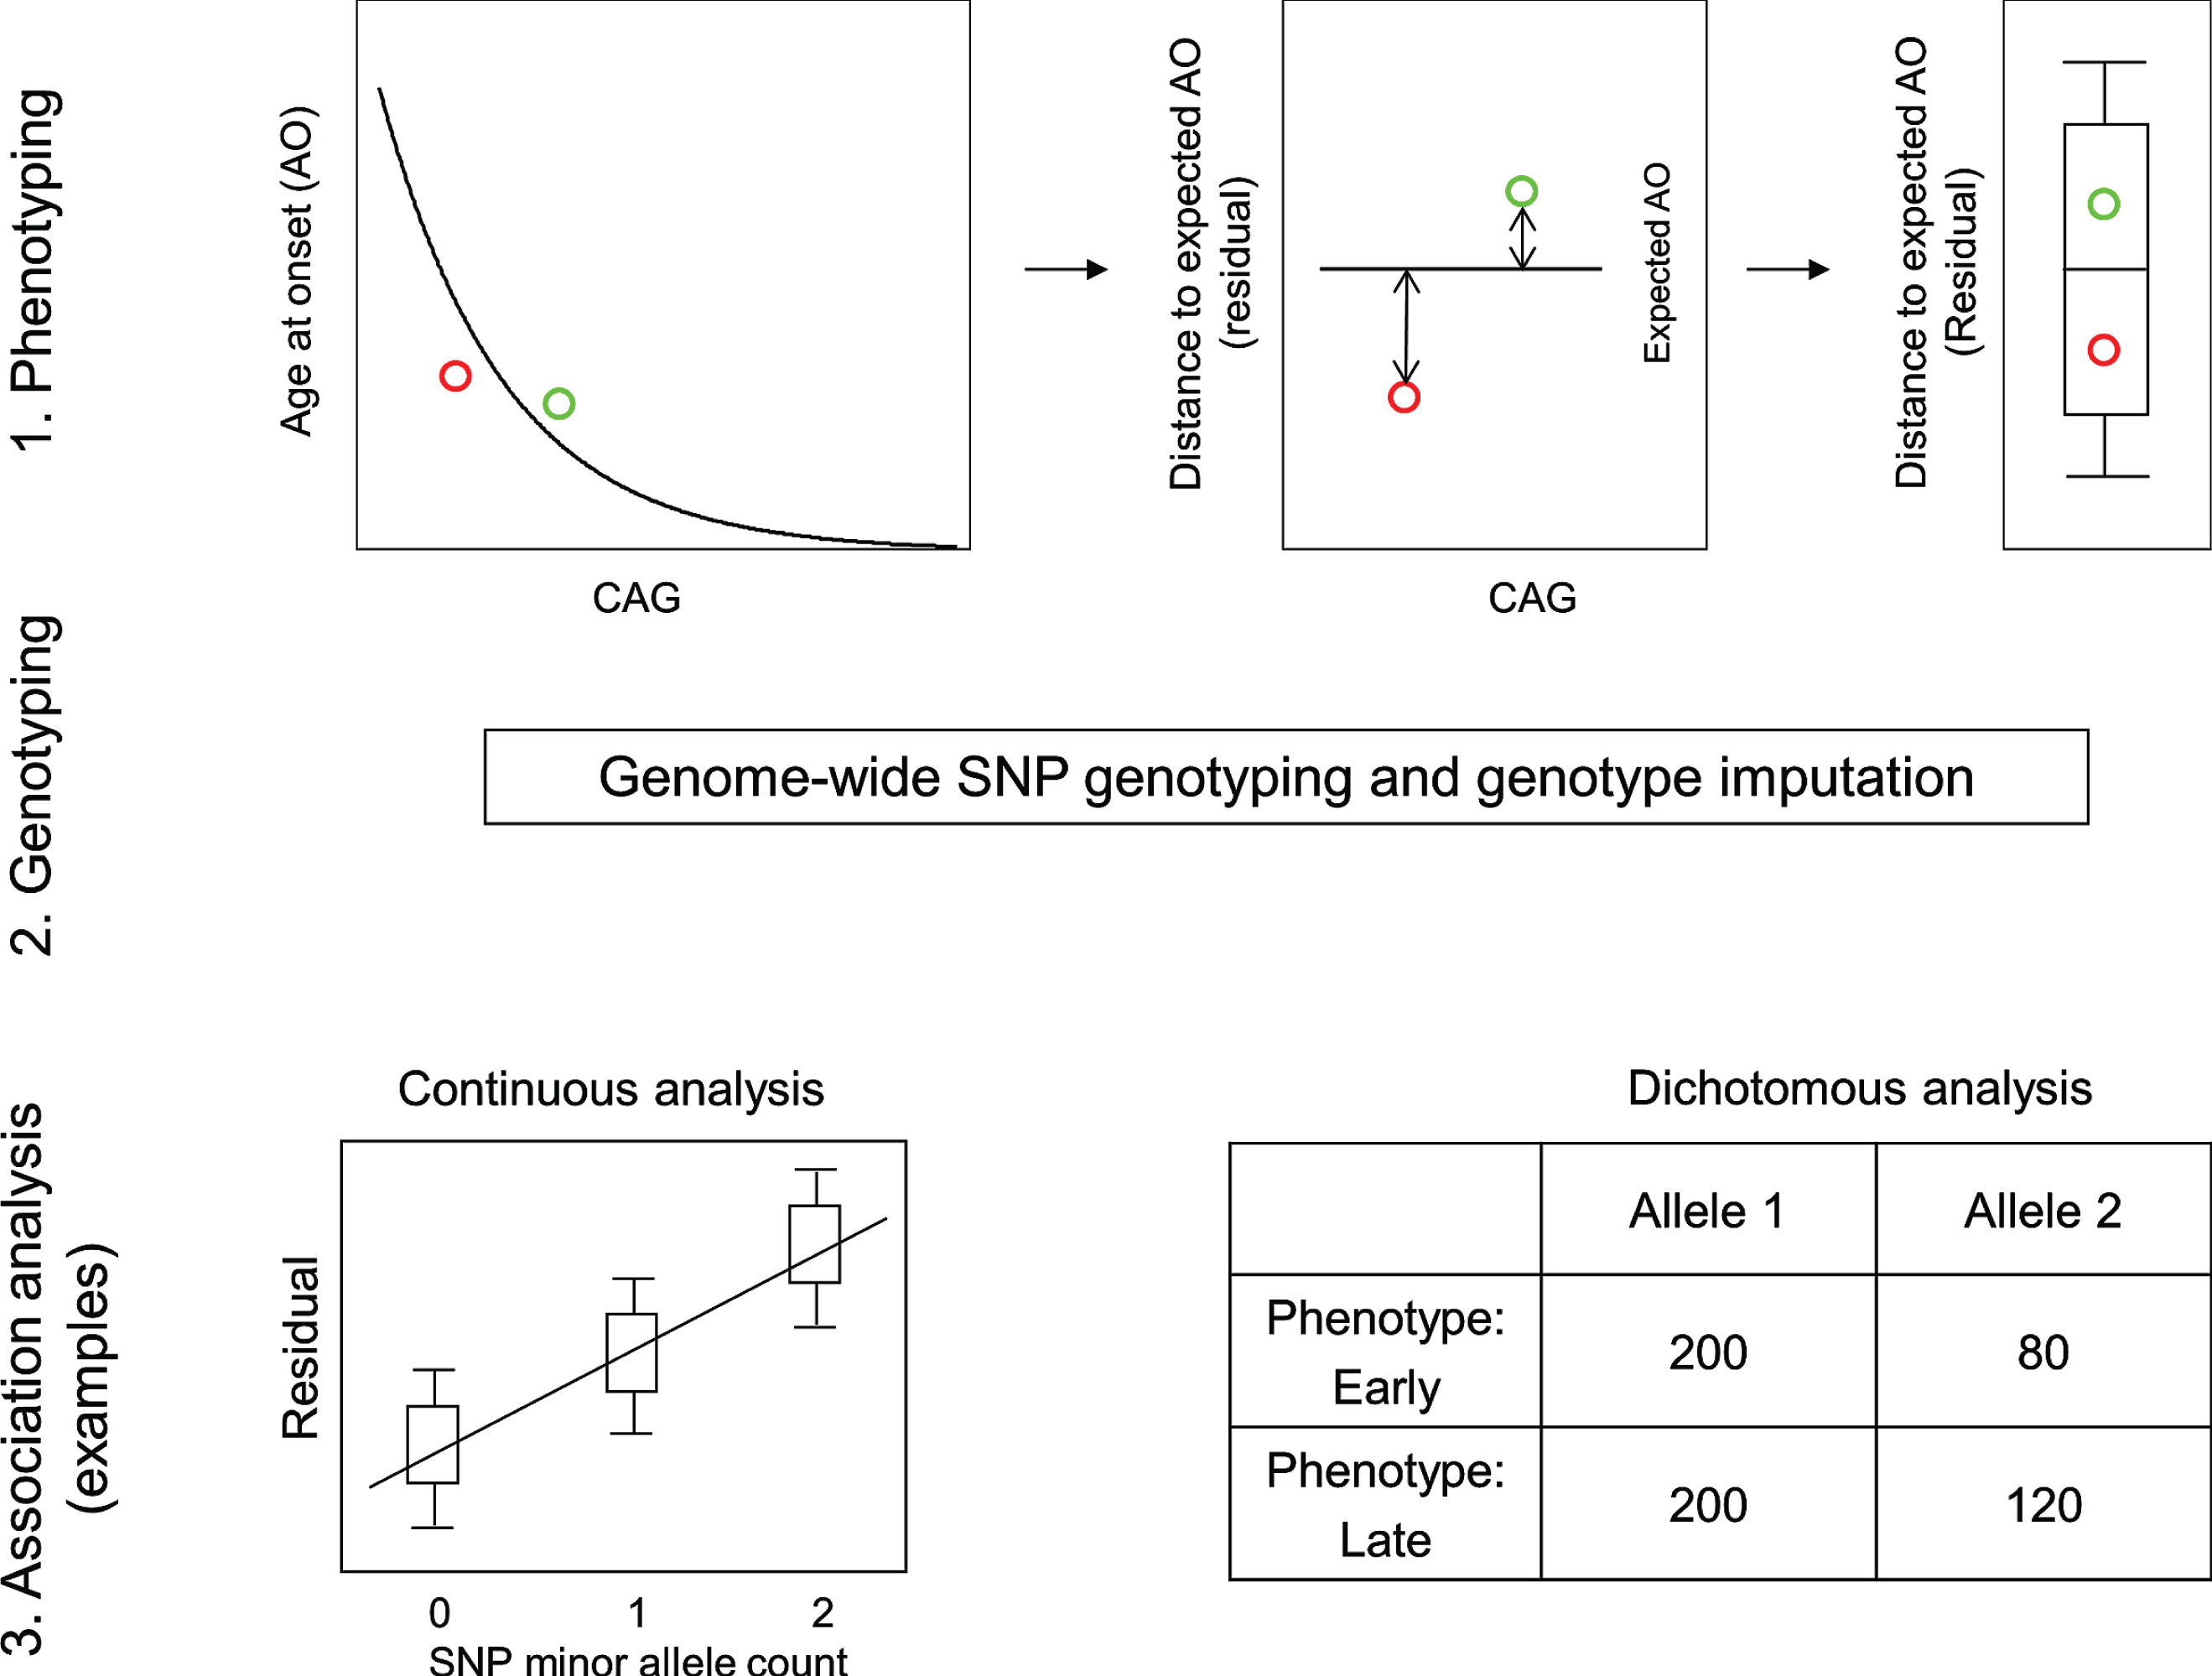 Continuous and dichotomous phenotypes used in GWA analysis. Three steps were taken to identify genetic modifiers in HD: 1) Phenotyping: For each HD subject, age at onset corrected for inherited CAG repeat length (i.e., residual age at onset) was calculated by subtracting the age at onset predicted for that individual (based on their CAG length in comparison with a large population of HD subjects) from the age at onset observed for that individual. 2) Genotyping: Genomic DNA samples were analyzed to determine genetic variations genome-wide, and subsequently used for genotype imputation using a large reference population in order to increase the number of SNPs available for analysis. 3) Association analysis: A statistical model was built to explain residual age at onset (continuous phenotype variable) as a function of a test SNP to judge significance in association between phenotype and genotype (continuous analysis). As a complementary approach, HD subjects with onset extremely earlier or later than their expected age at onset were identified based on residual age at onset, and for each test SNP, the allele frequencies were compared between the early and late groups (dichotomous analysis).